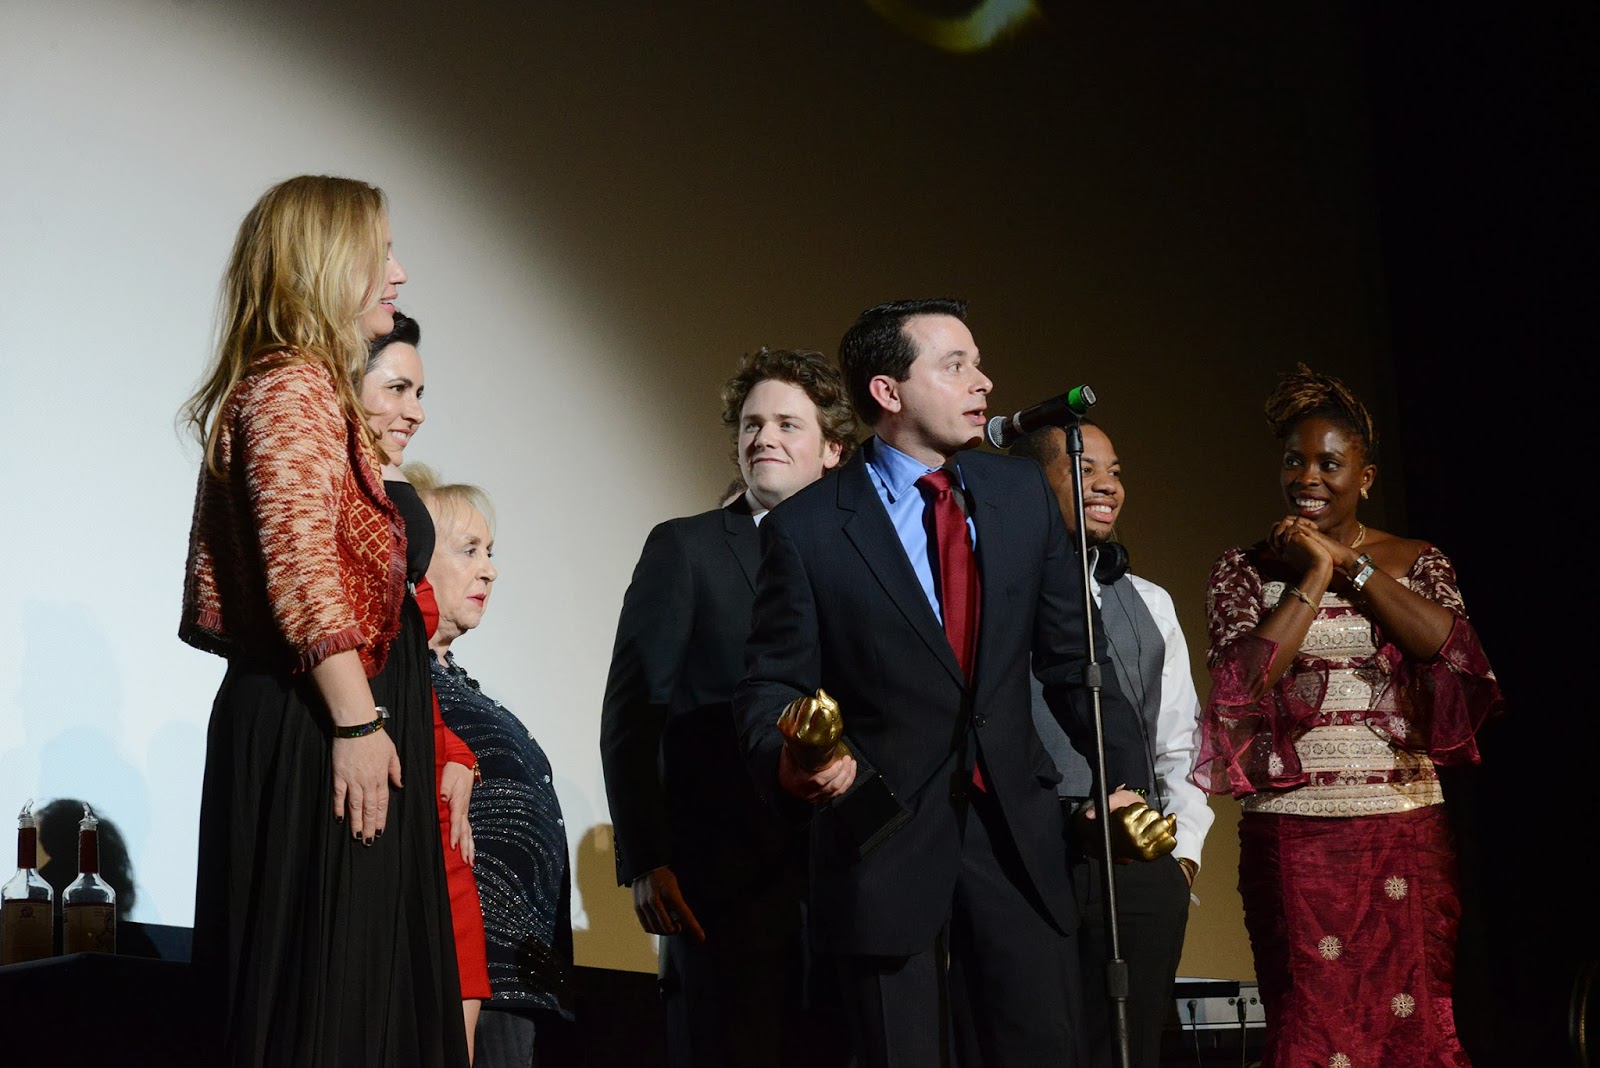 Accepting the TOSCAR for Best Parody (Terminate HER) at the 2014 Awards Ceremony at the Egyptian Theatr win Hollywood. Pictured with Heather Stevens, Montgomery Fisher, Adaora Nwandu, Jason Freeman, Nadia Wit and Presented to us by Doris Roberts.